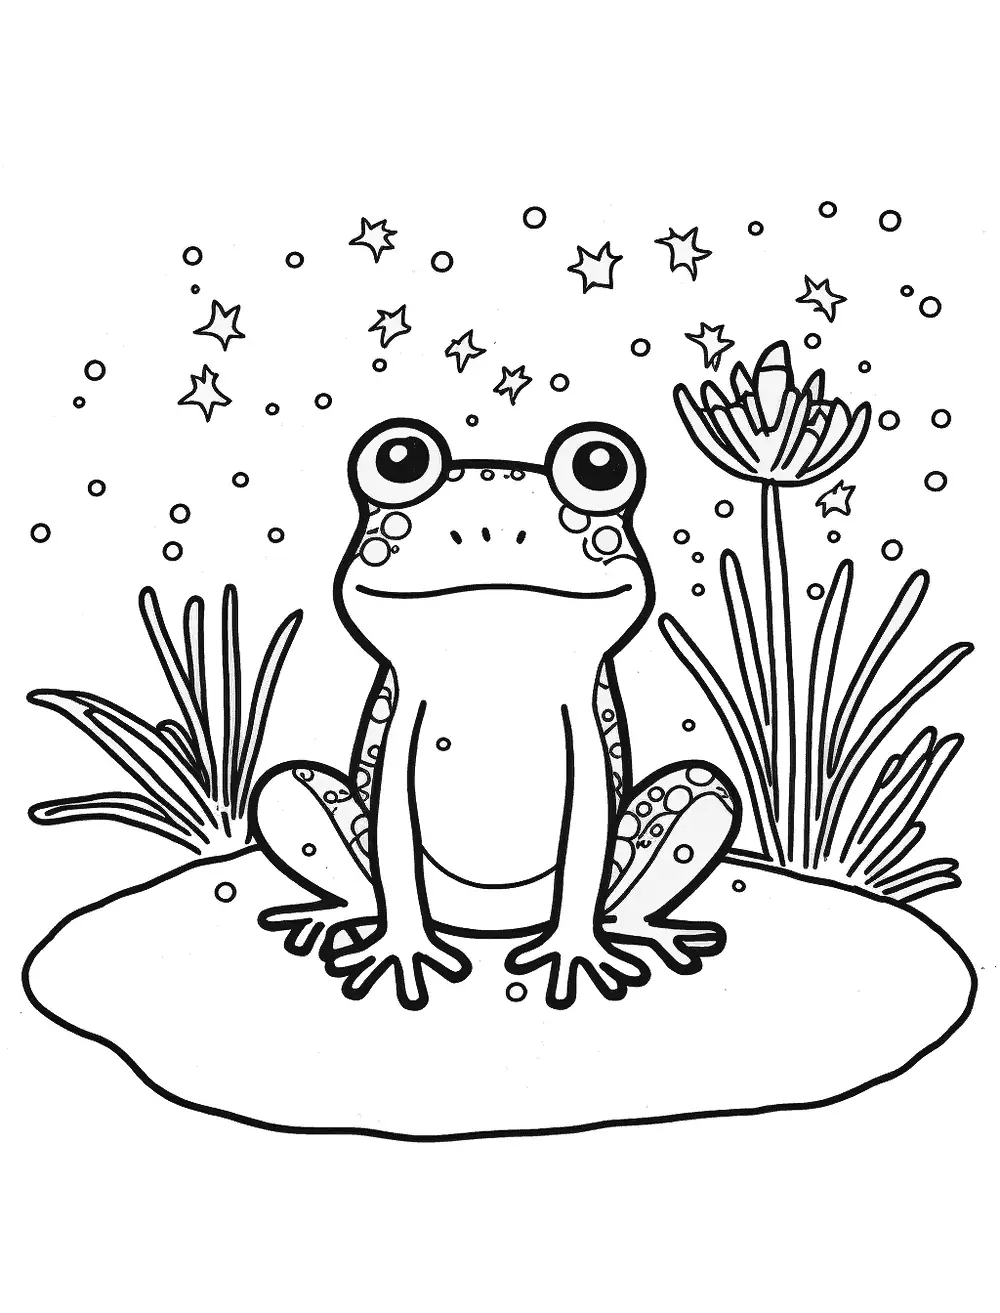 New Years Frog Coloring Page - A frog celebrating New Years with fireworks